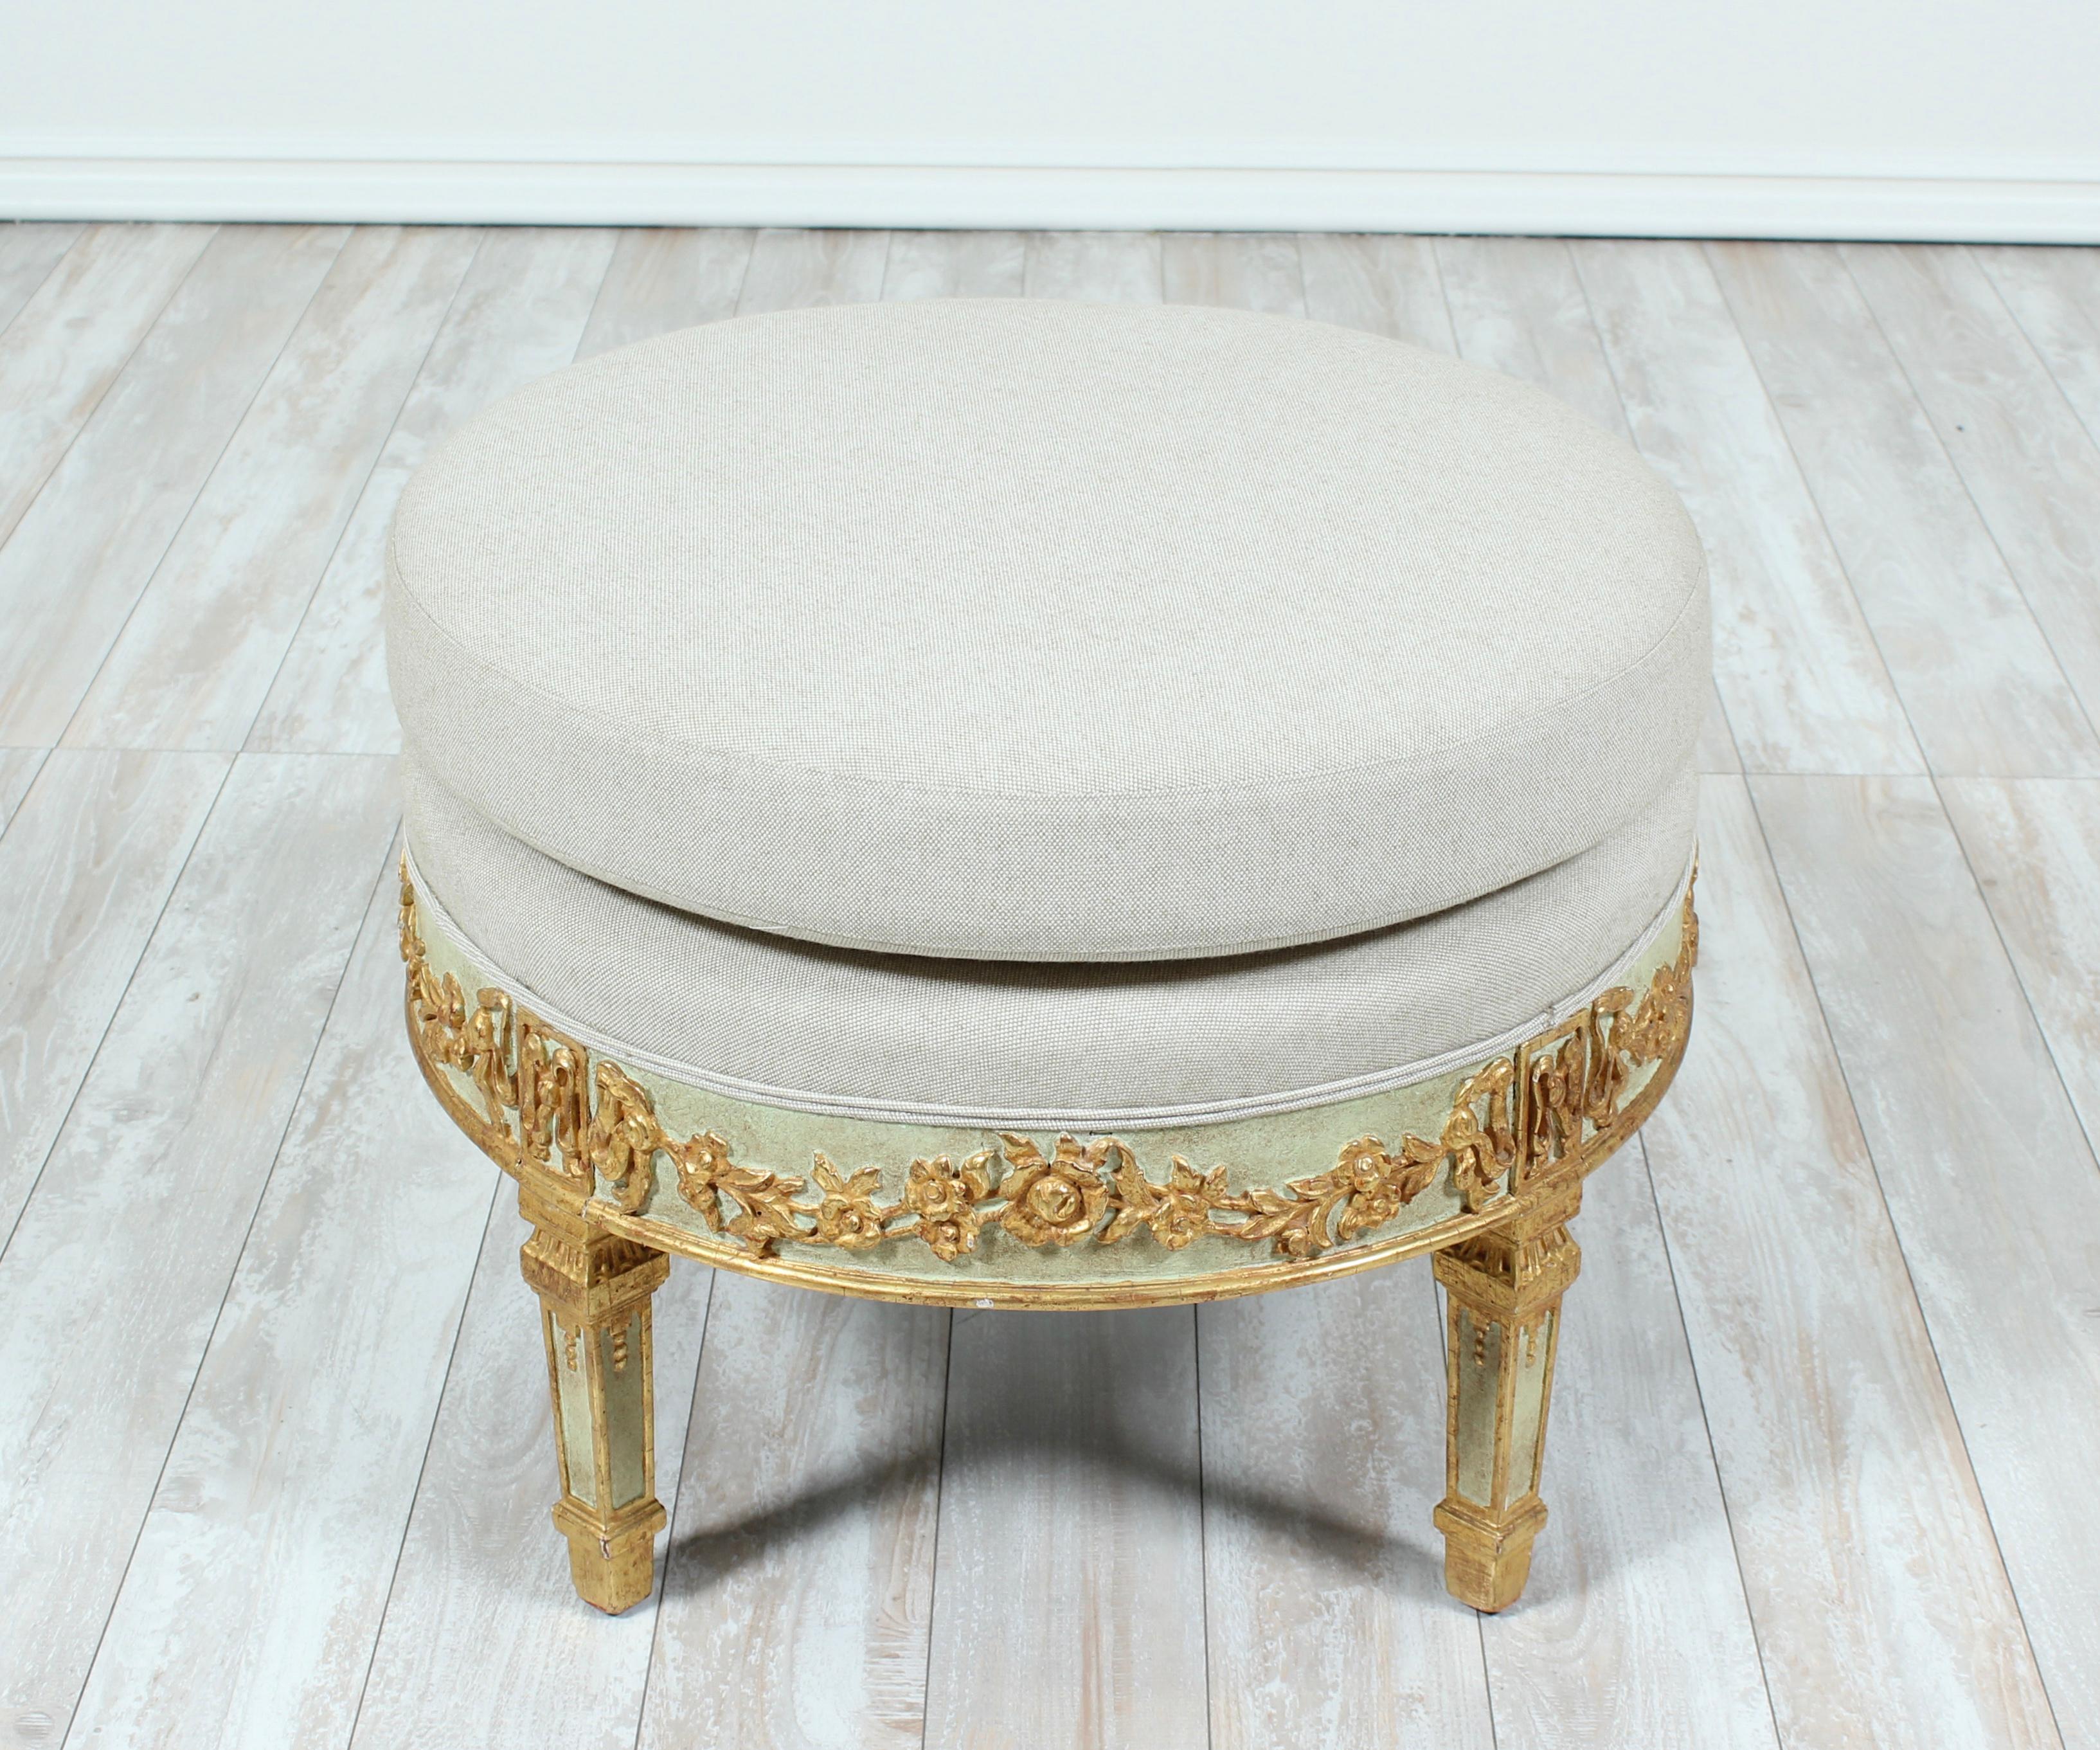 Beautiful Italian, 1940s aqua-green painted and parcel-gilt ottoman in the Neoclassical style. The ottoman feature a finely carve frieze consisting of flower garlands, bows and four tapered square legs. Newly upholstered in a fine linen textile.